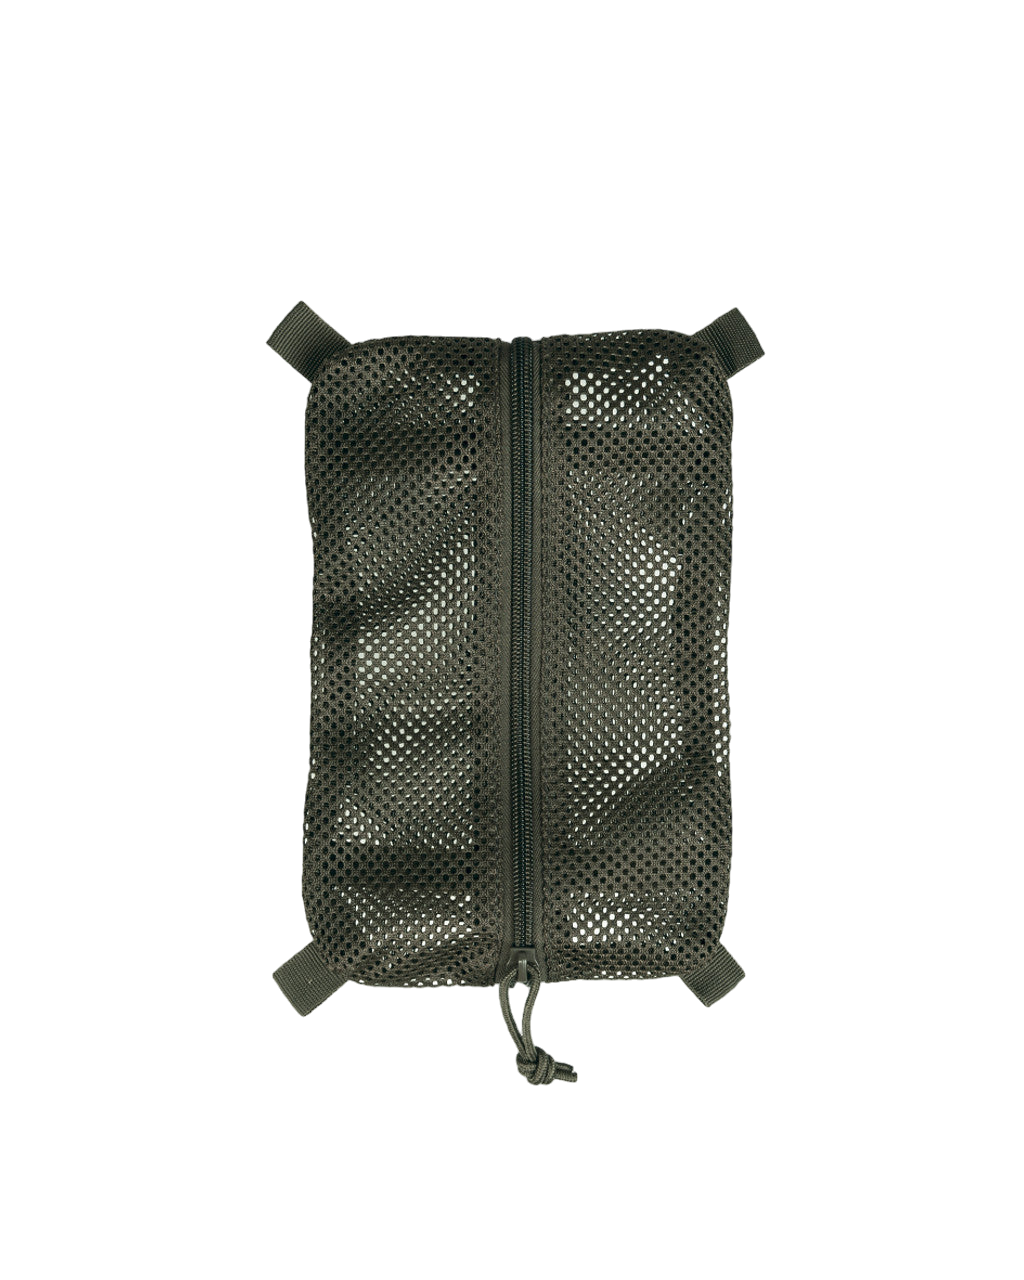 A black Six Gun Surplus MIL-TEC® OD MESH BAG W/VELCRO lies flat against a plain background. The pouch has a mesh design with visible holes and a central zipper closure. Fabric tabs at each corner add to its functionality, making it ideal for outdoor gear storage or easy handling.